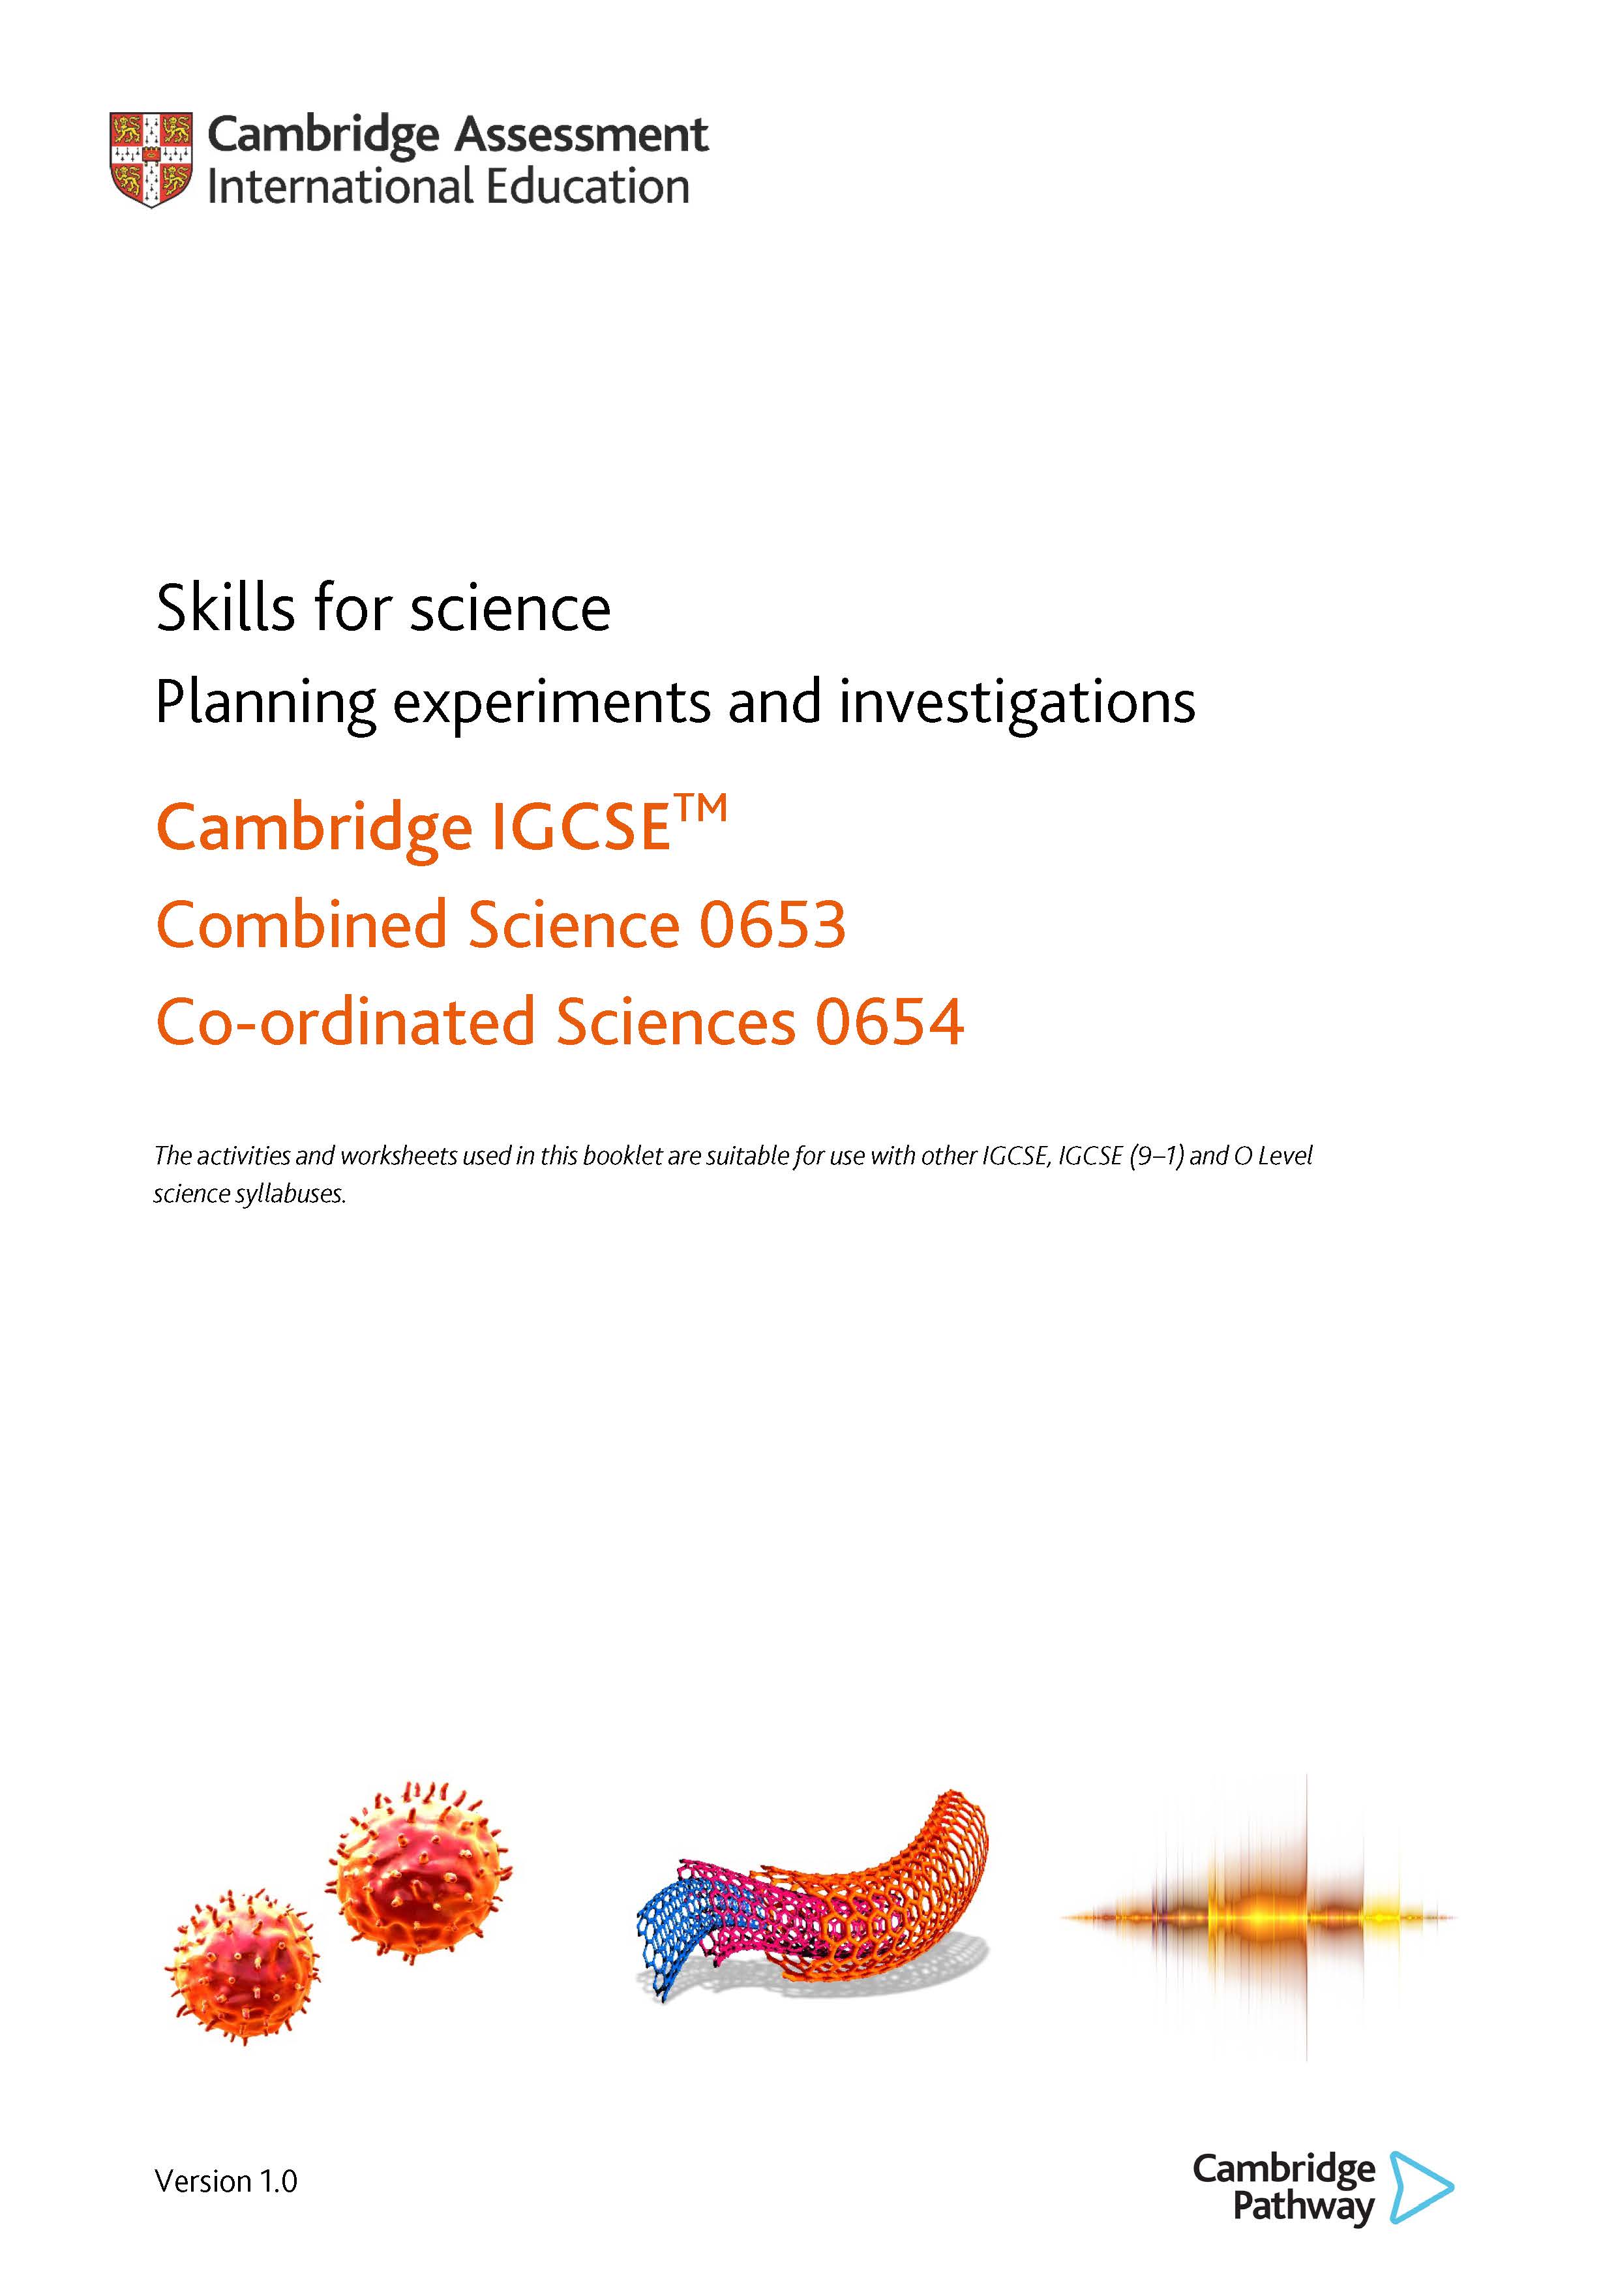 Skills for science - Planning